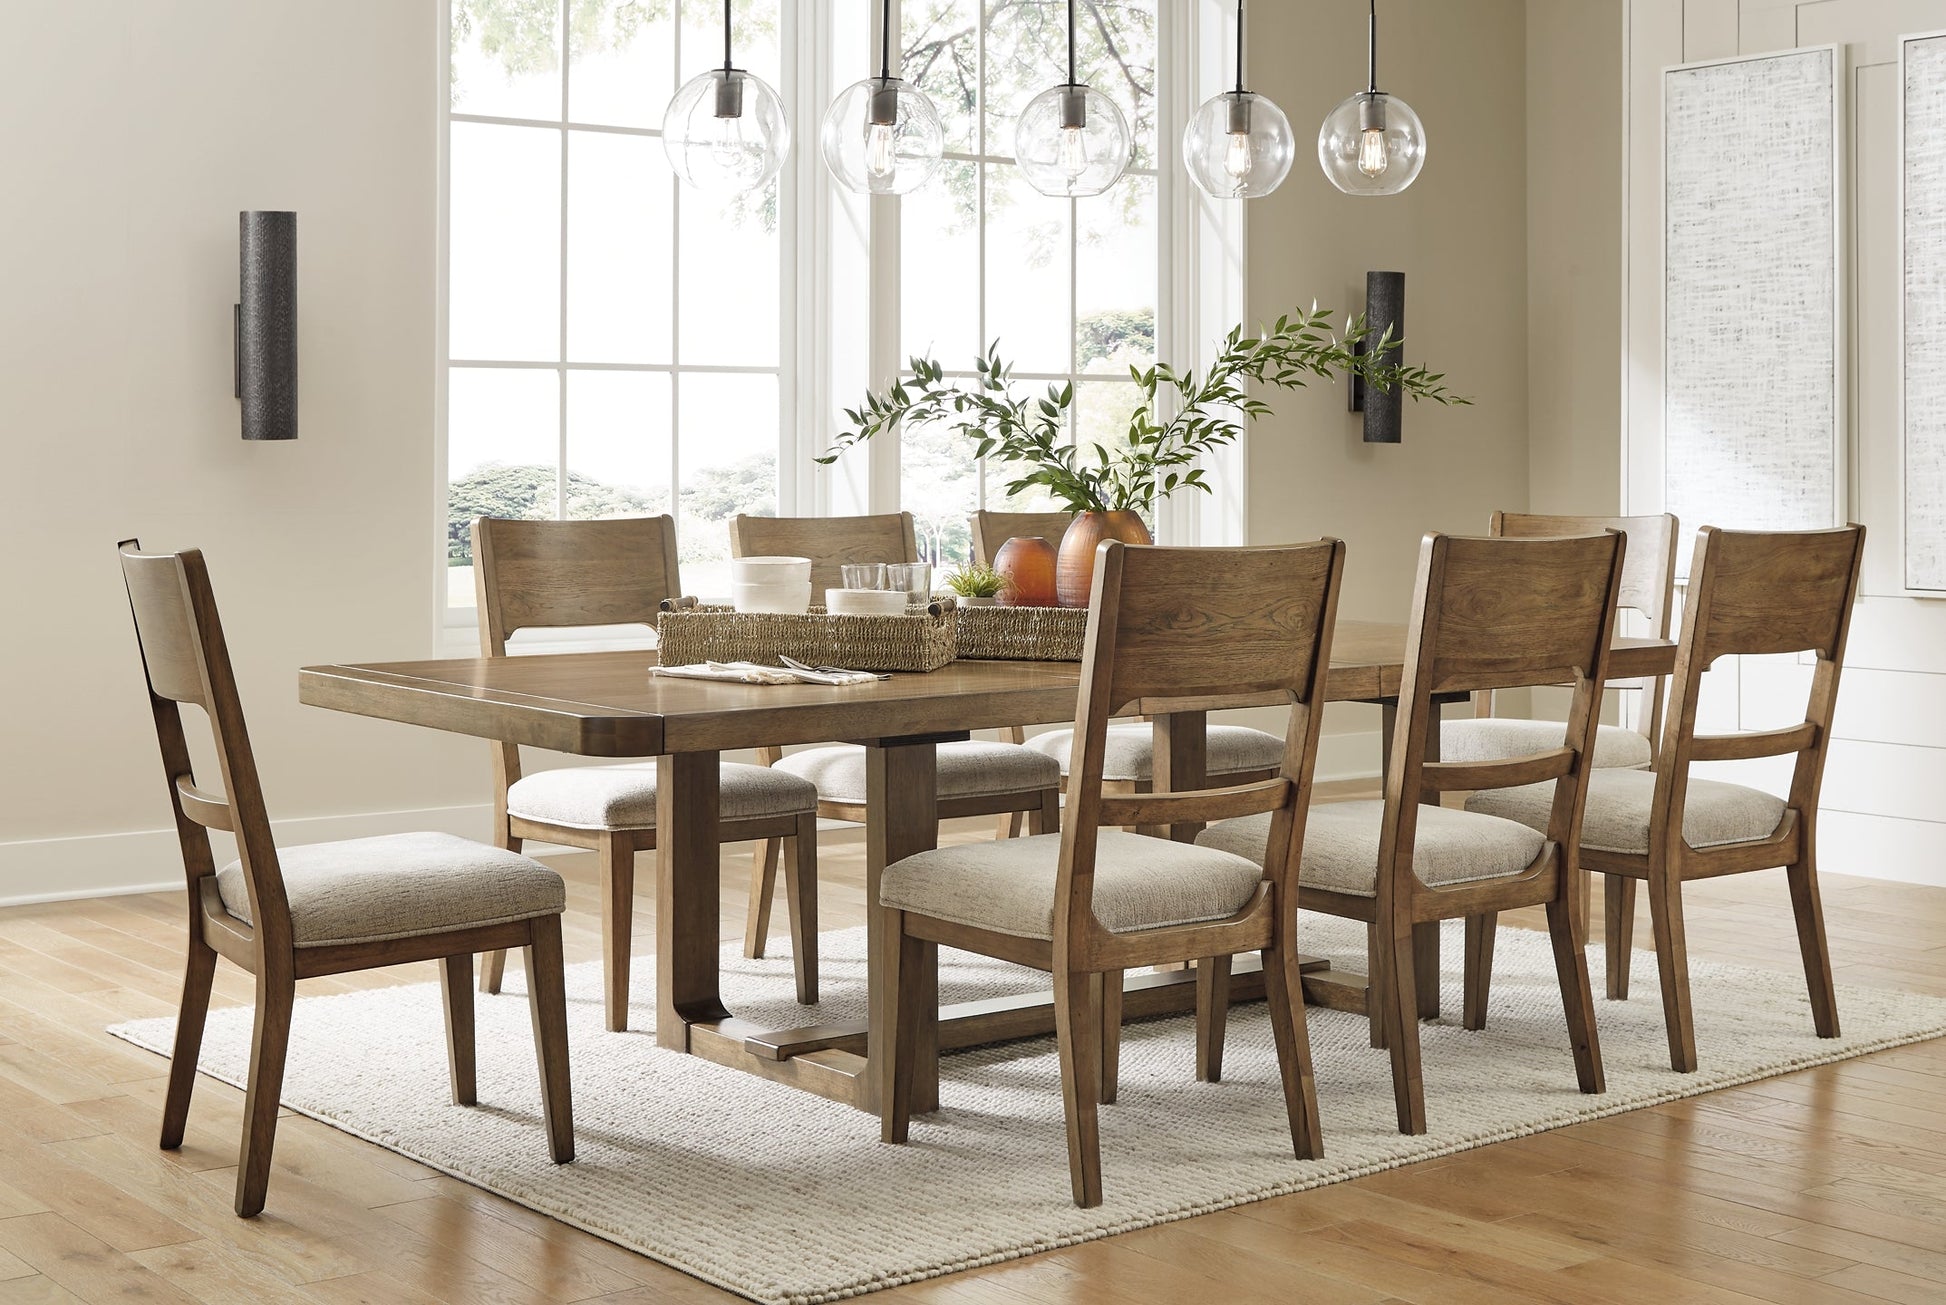 Cabalynn Dining Table and 8 Chairs at Walker Mattress and Furniture Locations in Cedar Park and Belton TX.